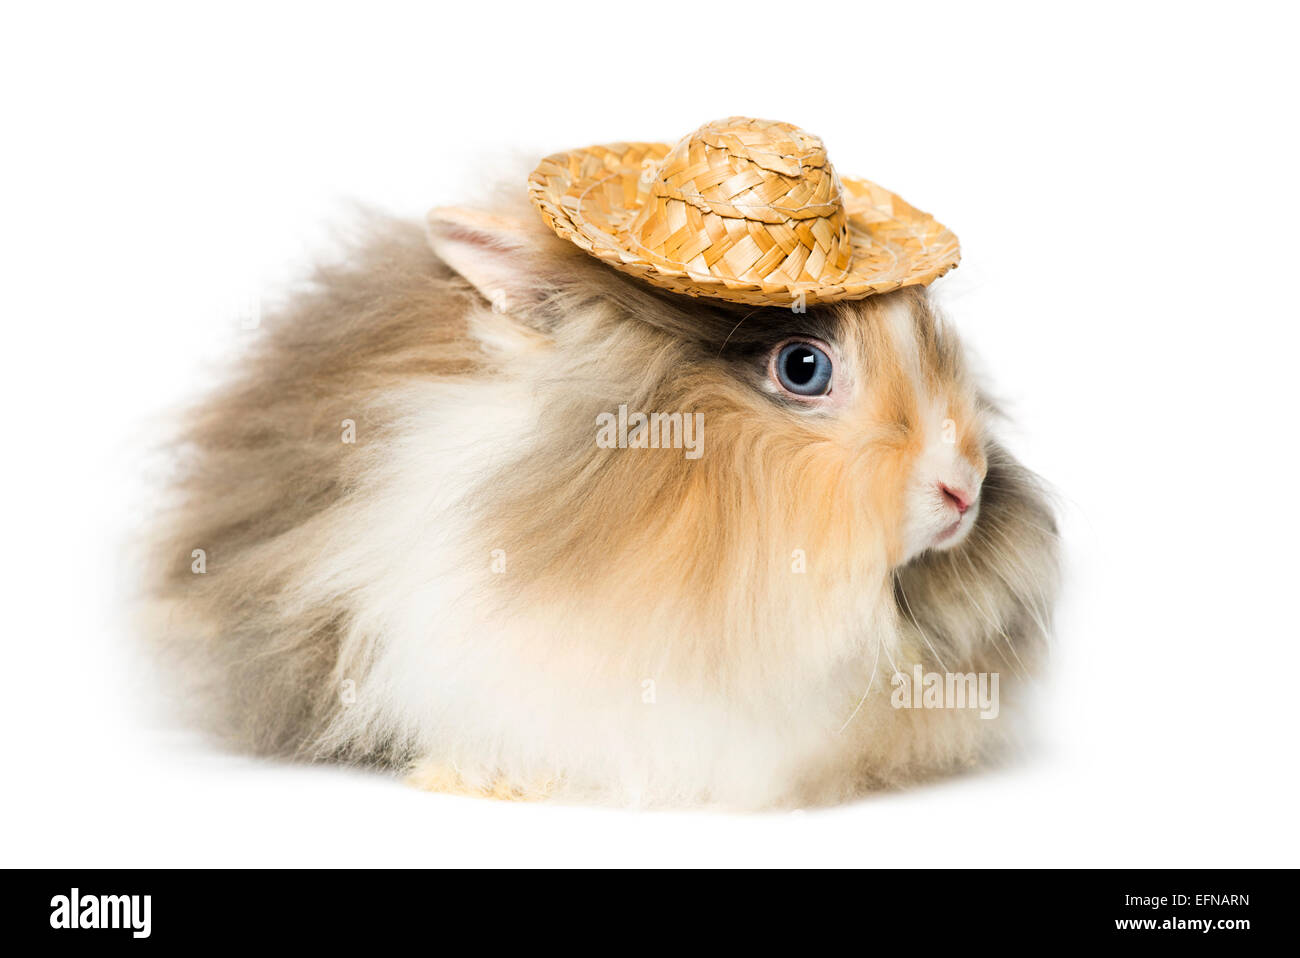 Rabbit wearing a straw hat in front of white background Stock Photo